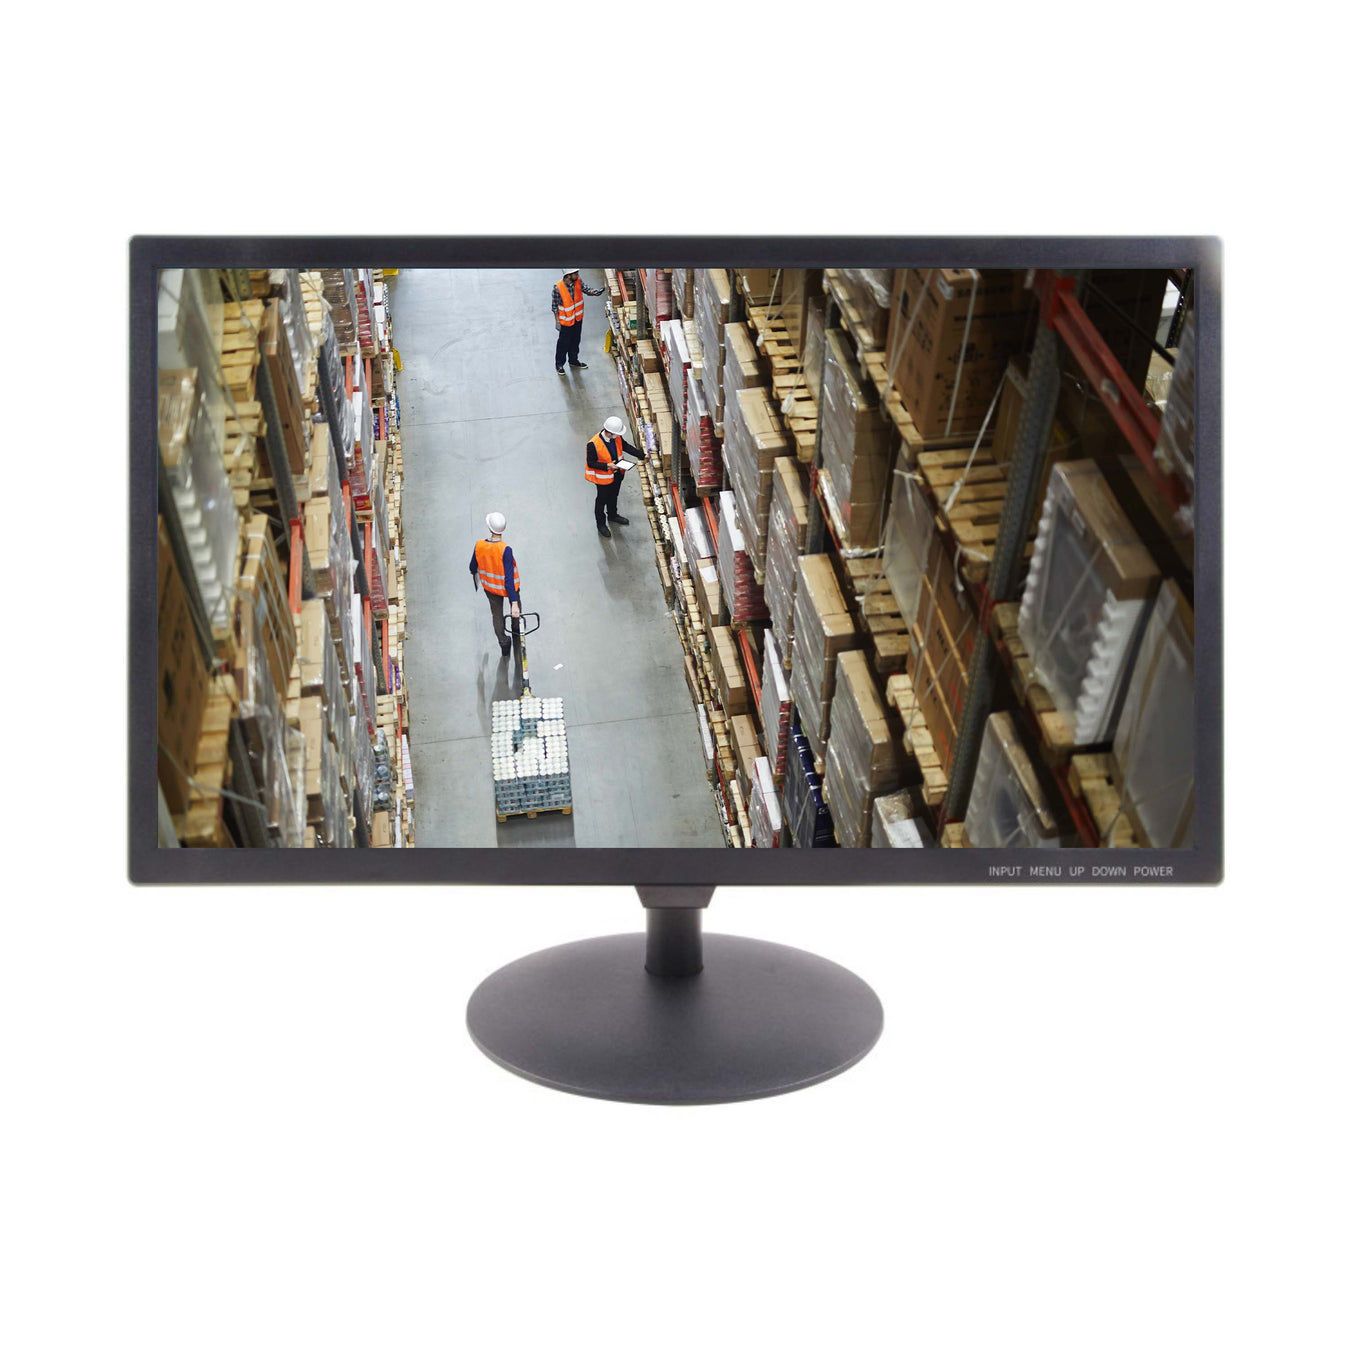 Monitor Highlight March 2022